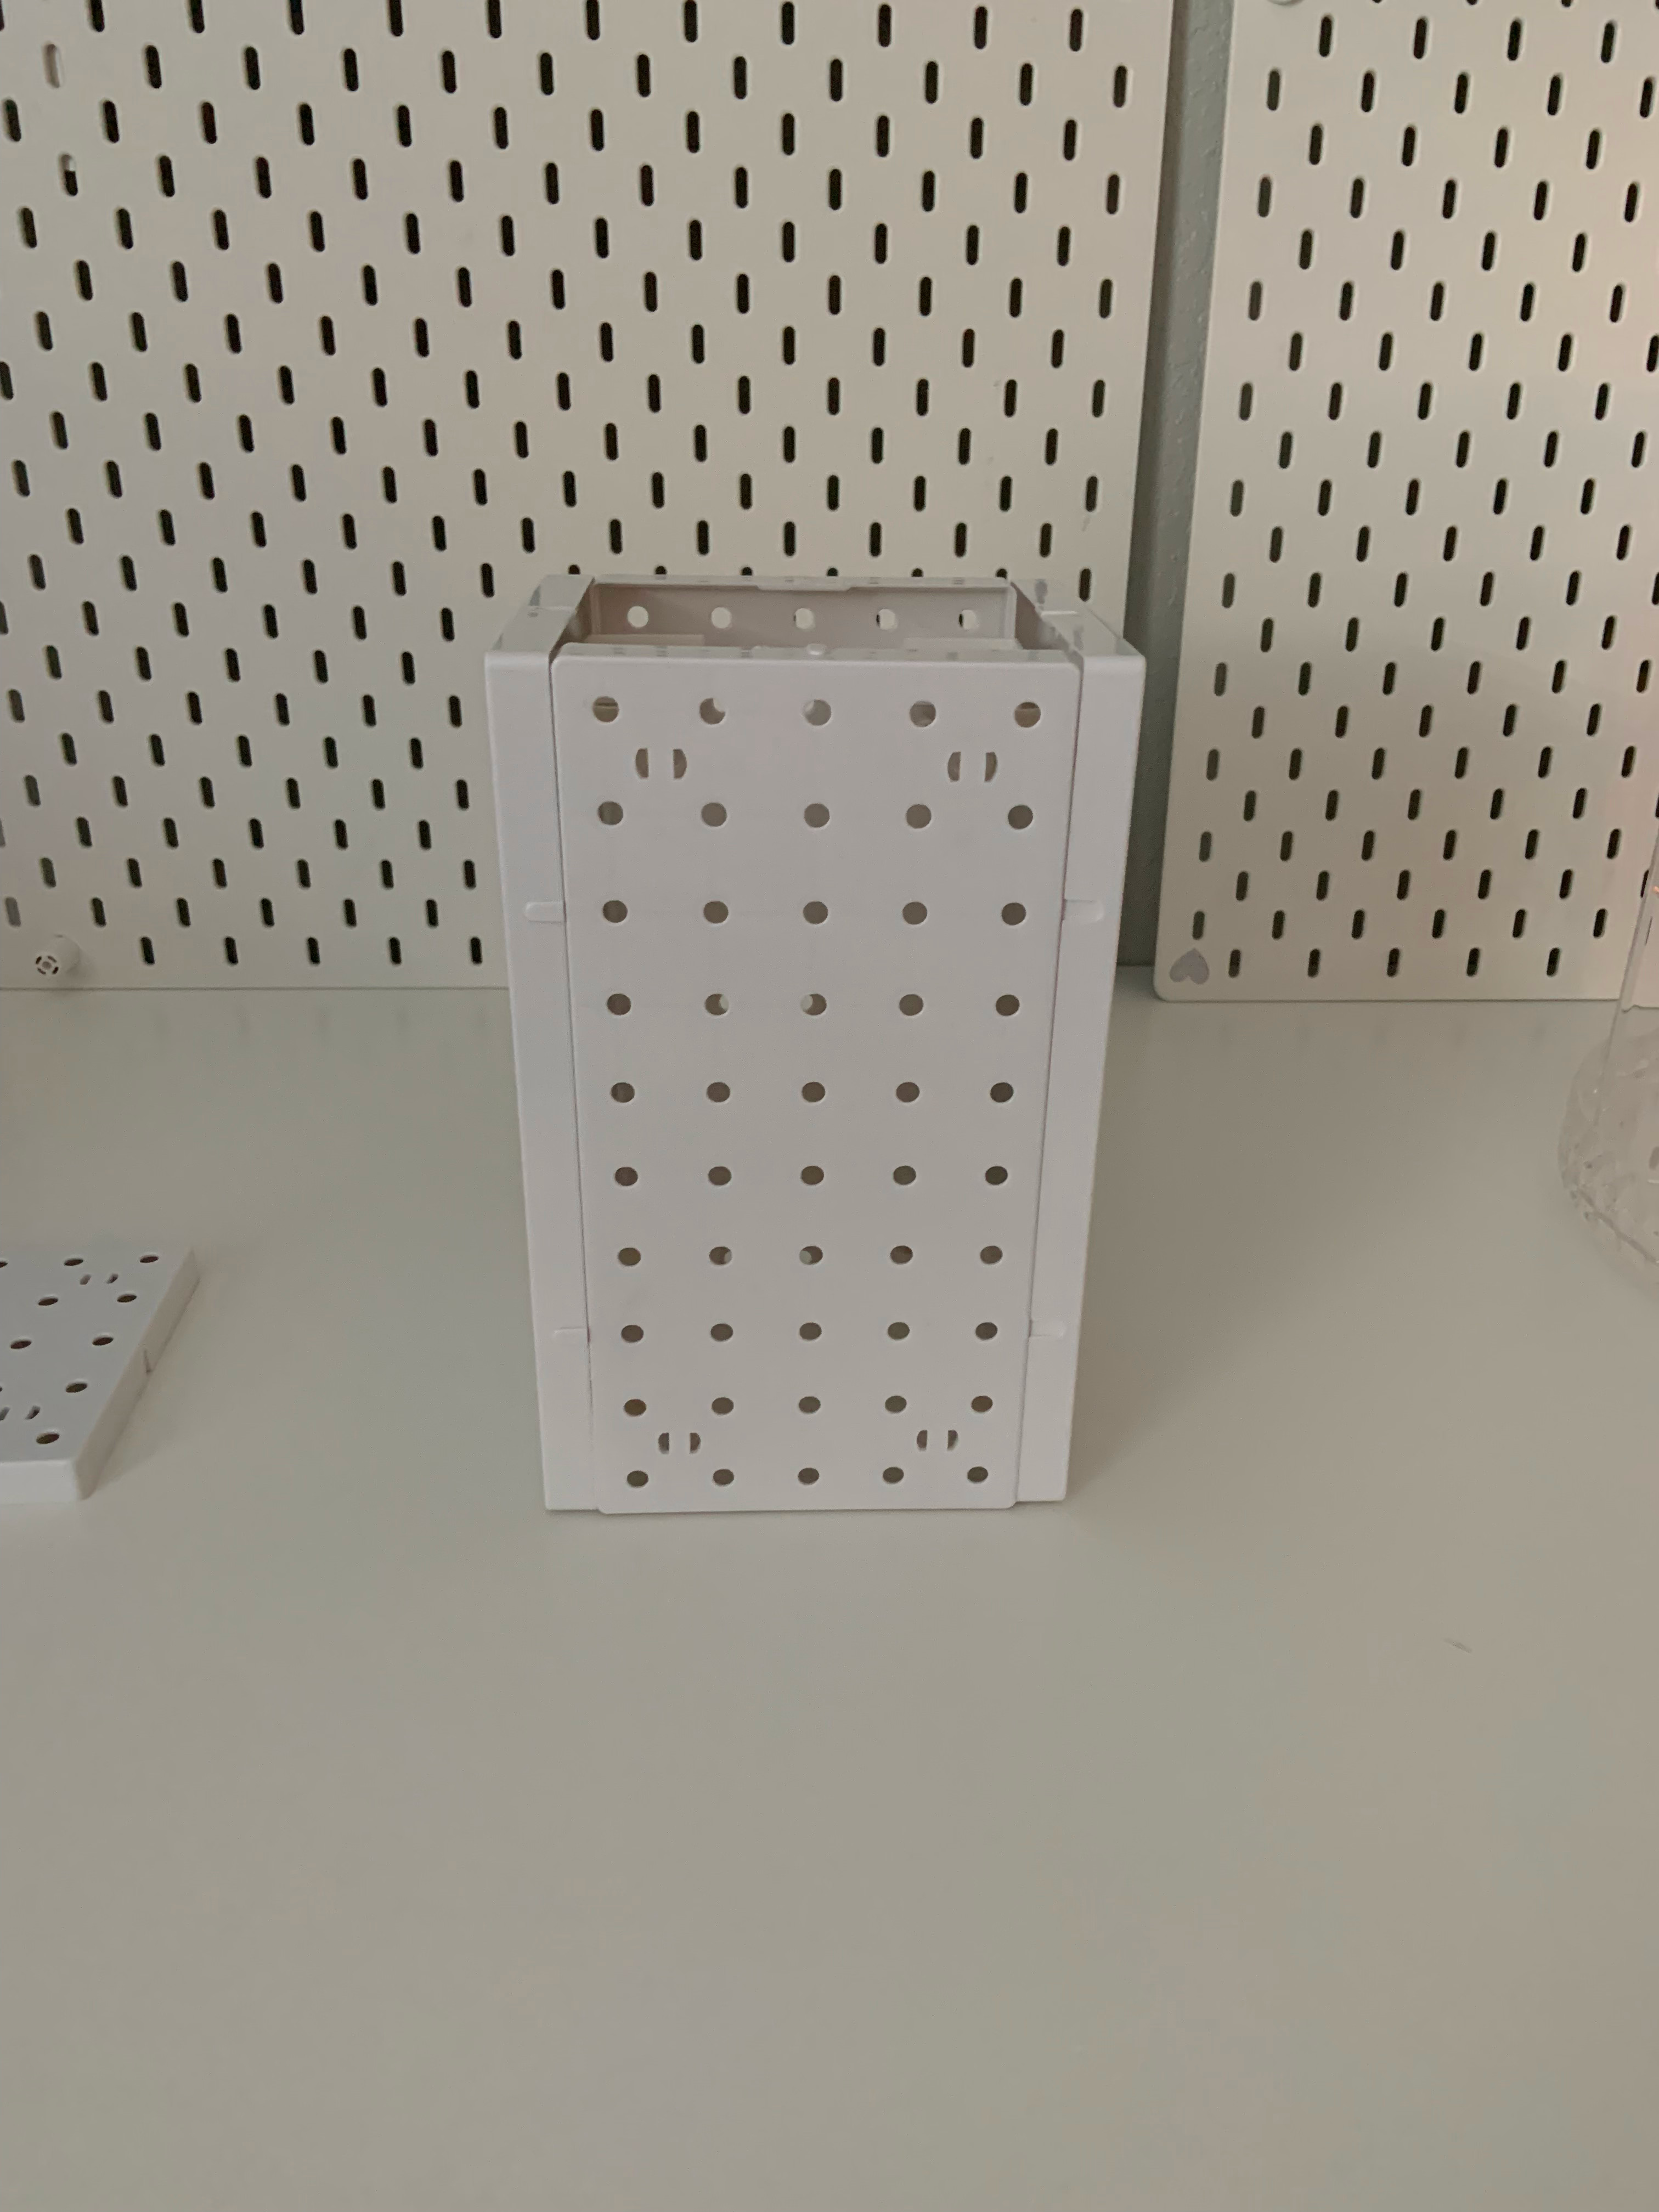 90 degree Connector for Dollar Tree pegboard system